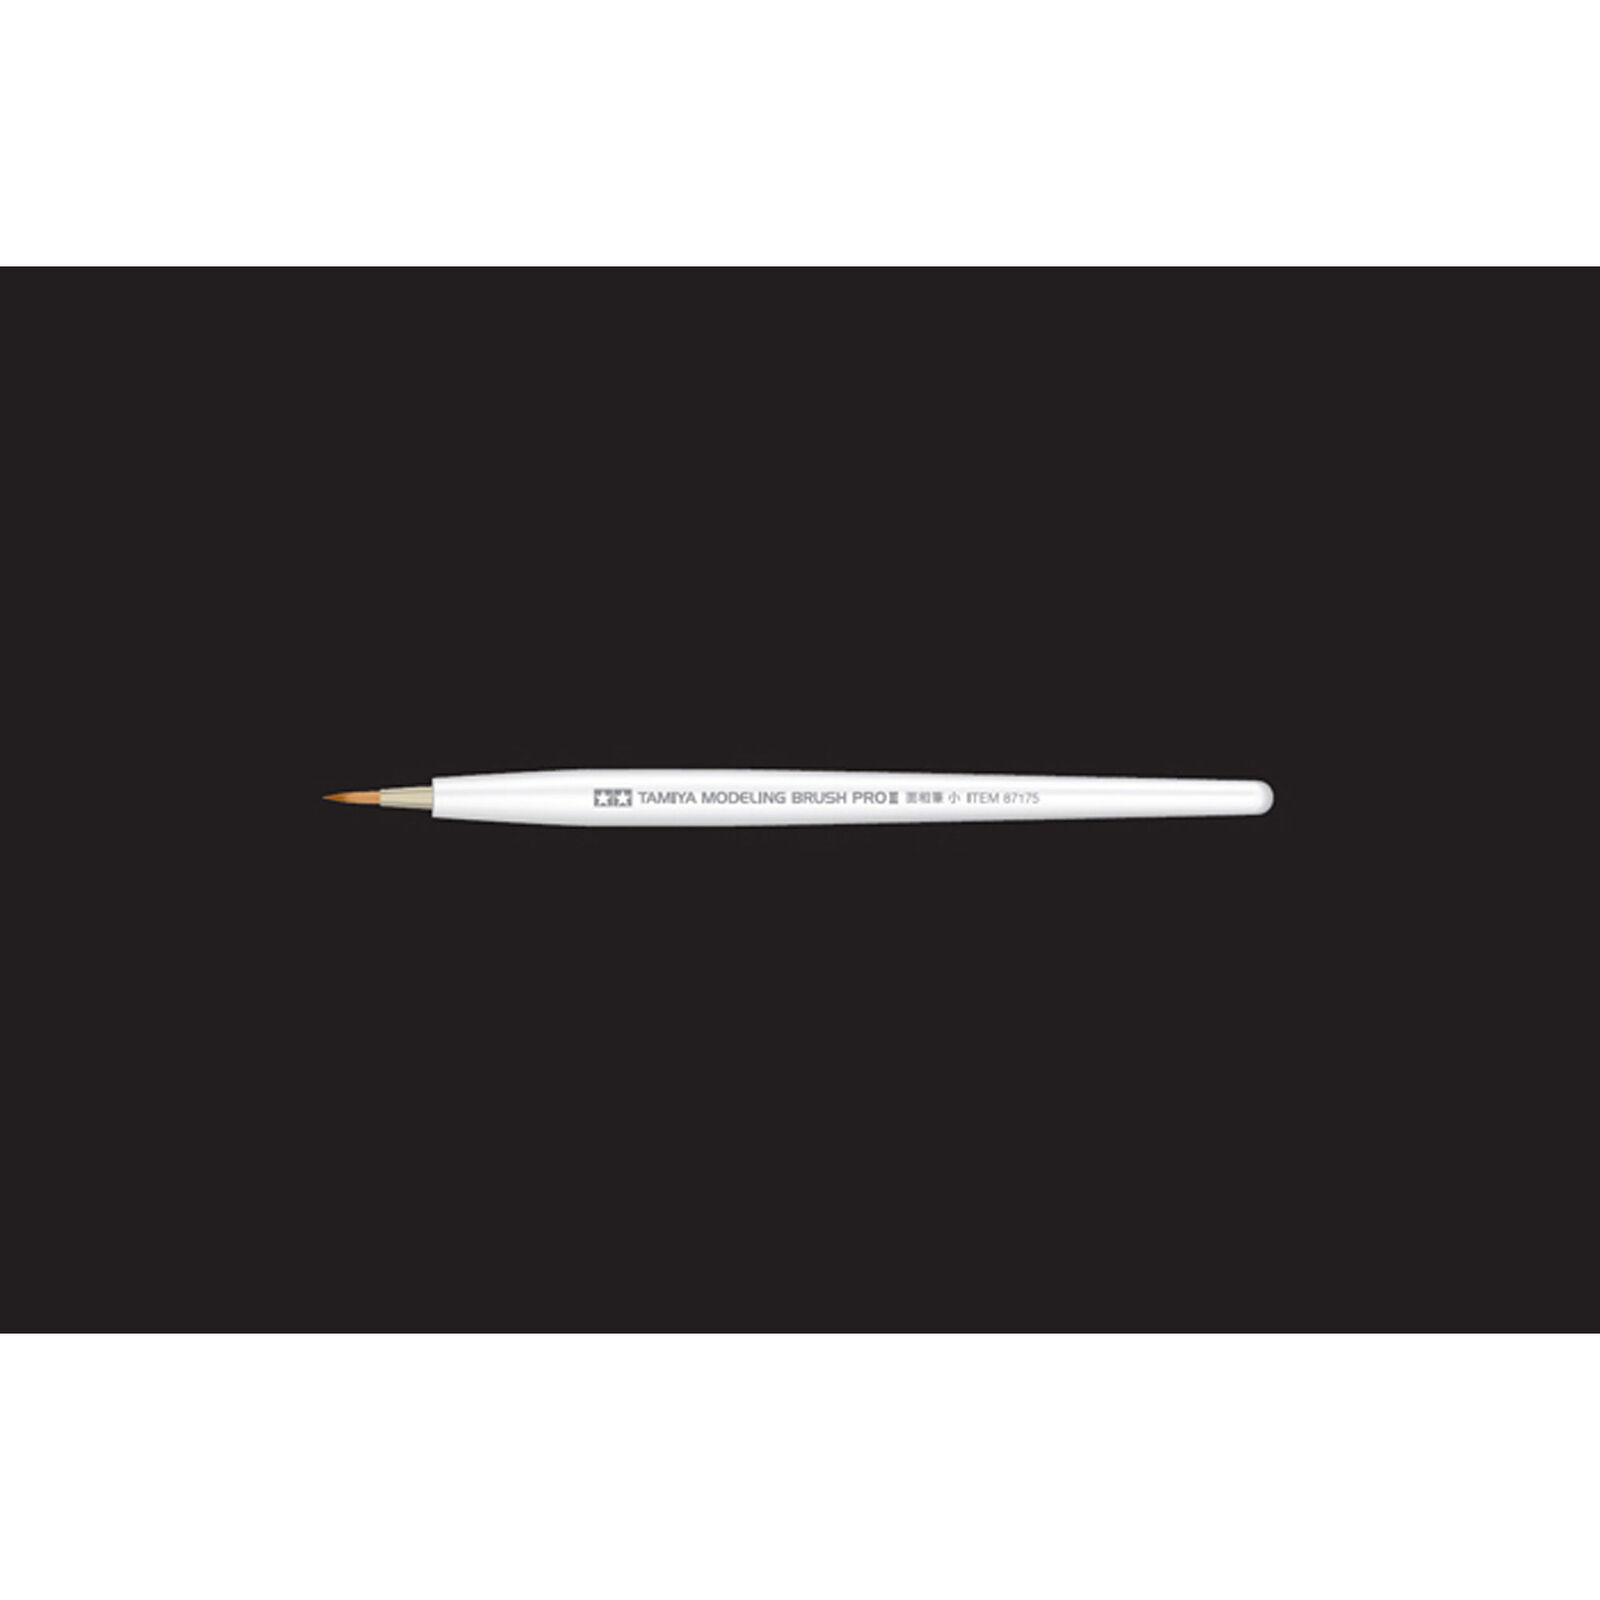 Modeling Pointed Brush PRO II Small